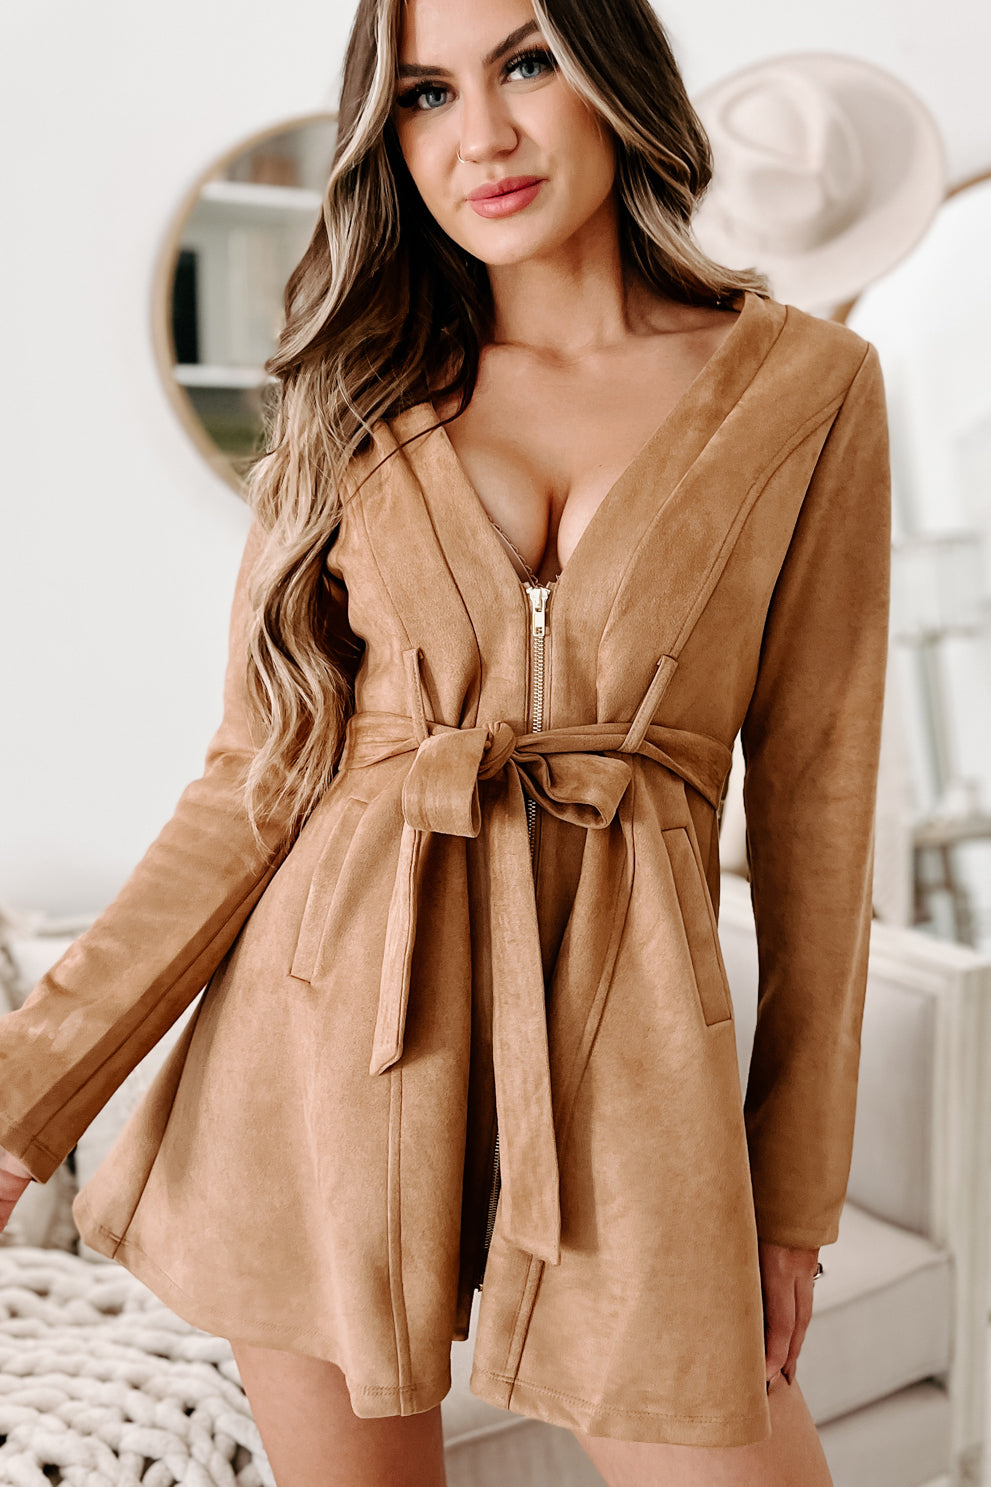 Doorbuster- Yours Forever Faux Suede Jacket (Camel) - NanaMacs